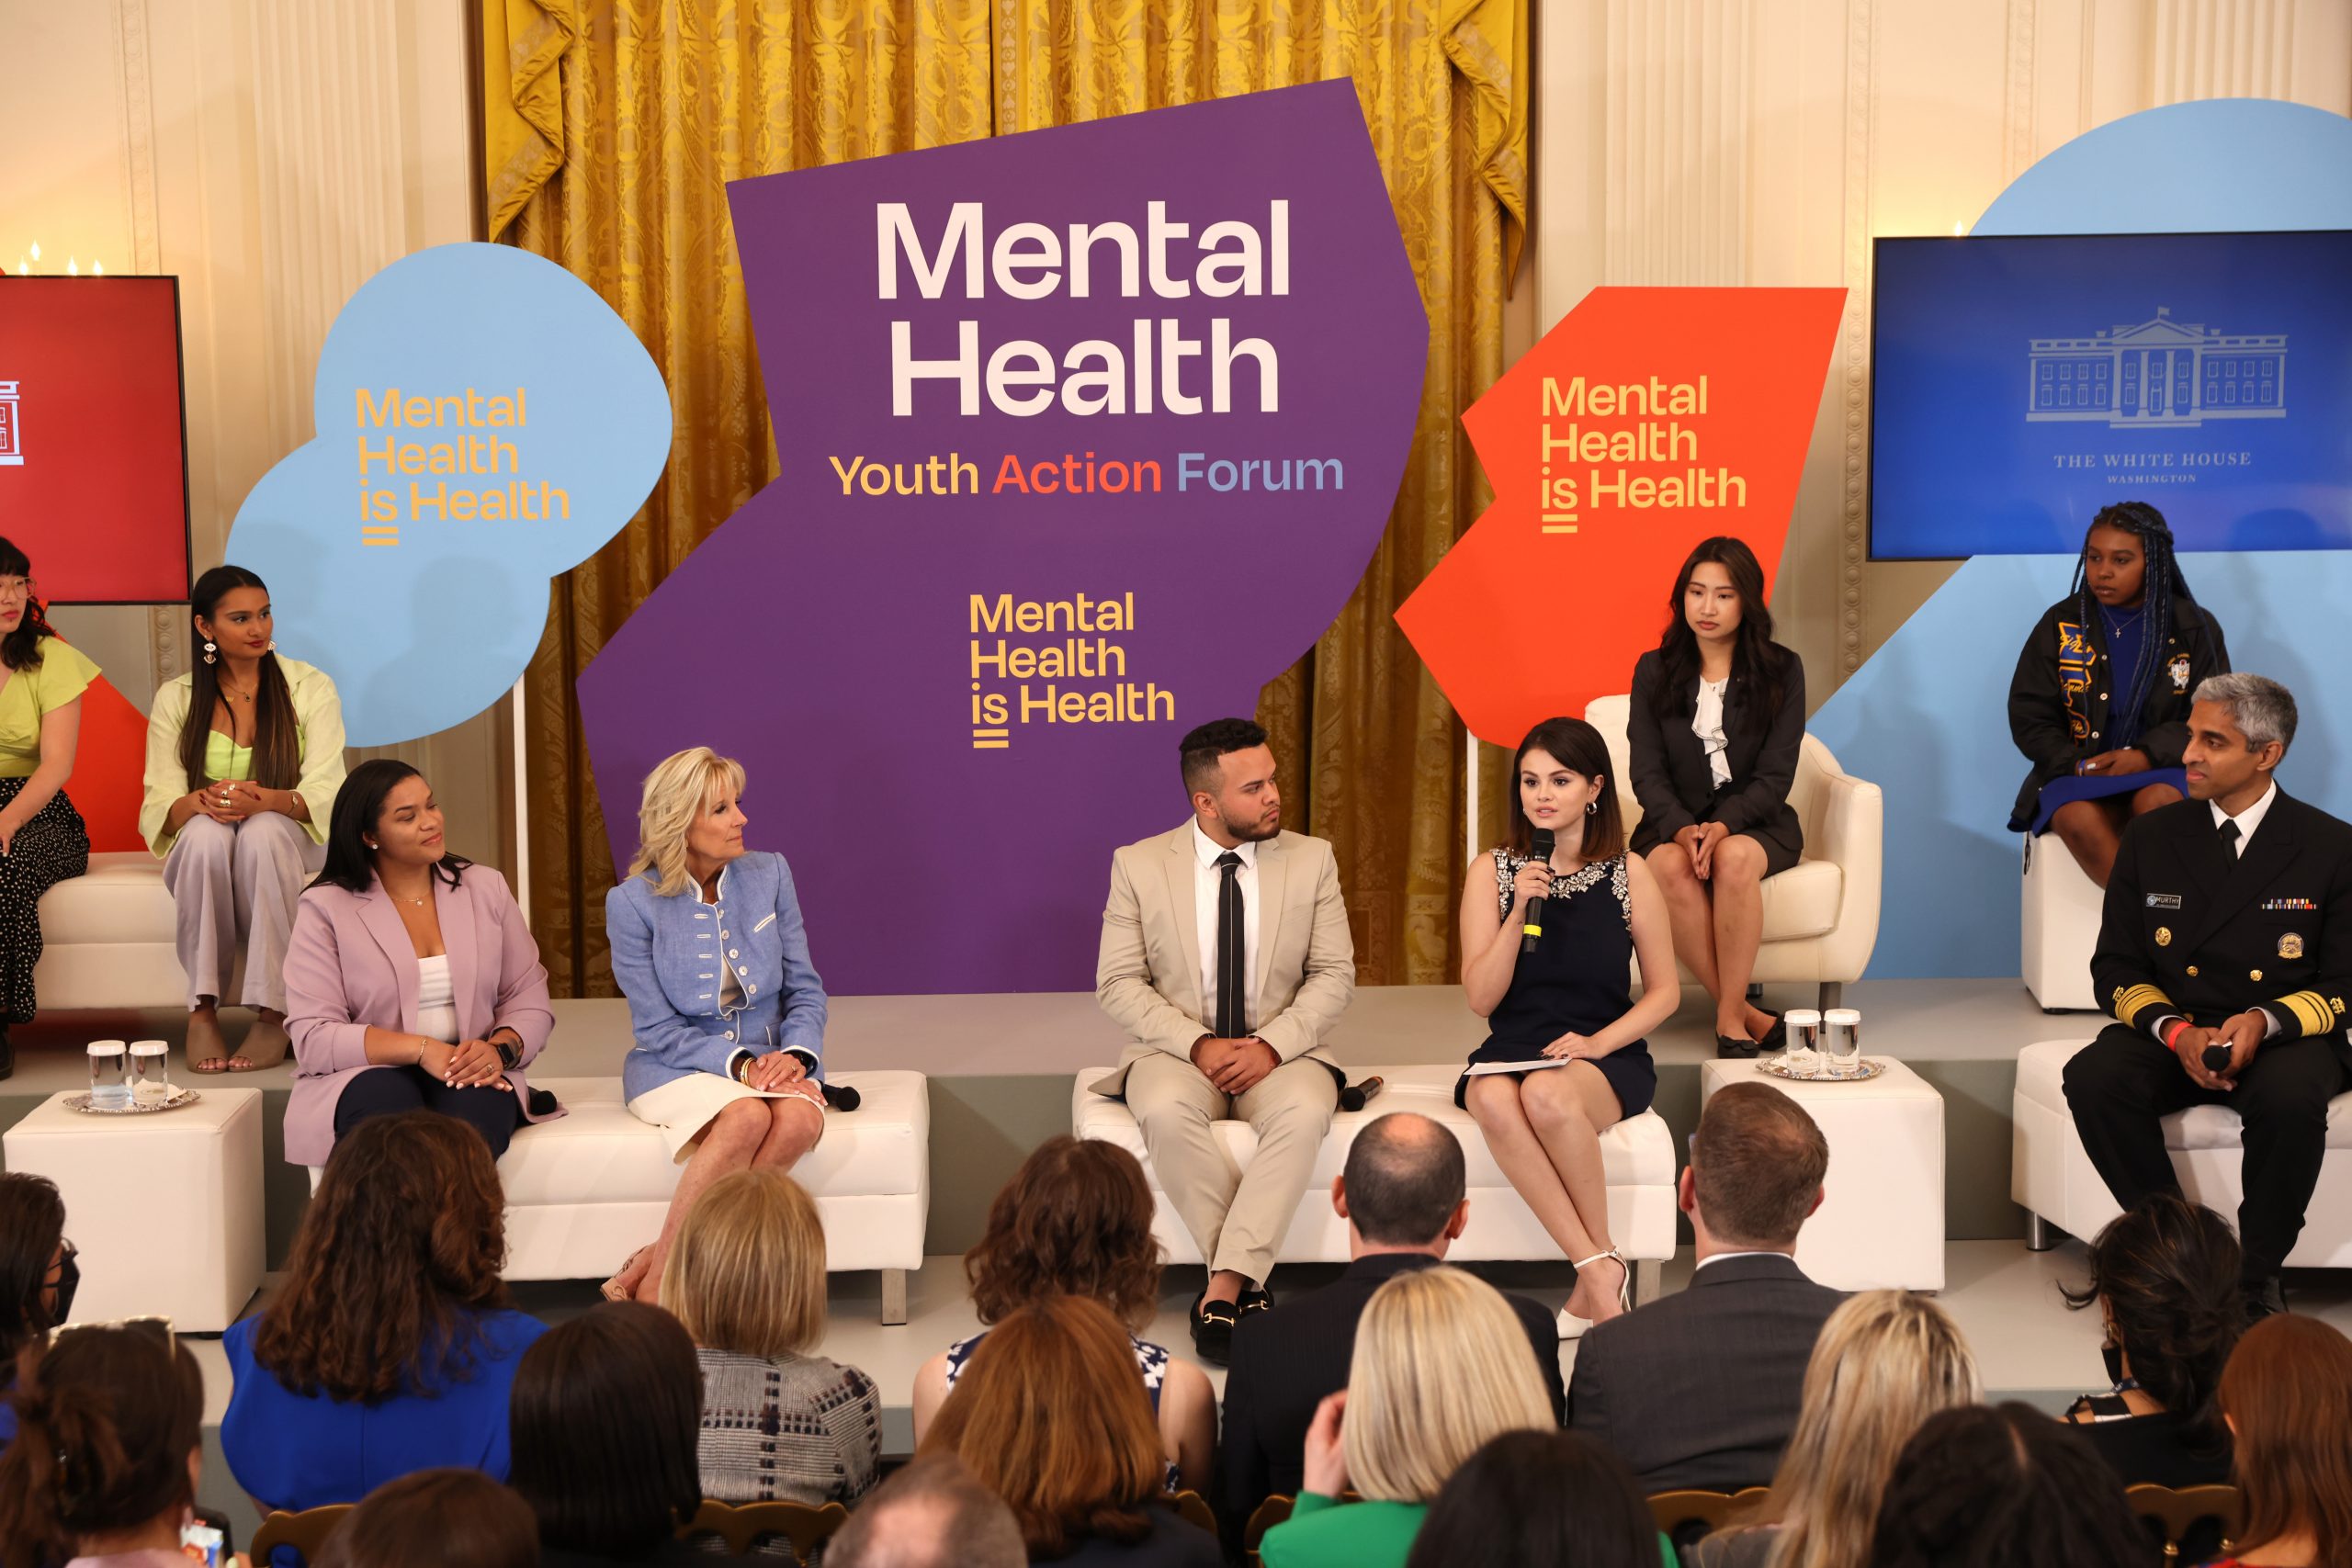 WASHINGTON, DC - MAY 18: Dr. Jill Biden, Juan Acosta, Selena Gomez and Dr. Vivek Murthy appear on stage as MTV Entertainment hosts first ever Mental Health Youth Forum at The White House on May 18, 2022 in Washington, DC. (Photo by Tasos Katopodis/Getty Images for MTV Entertainment)